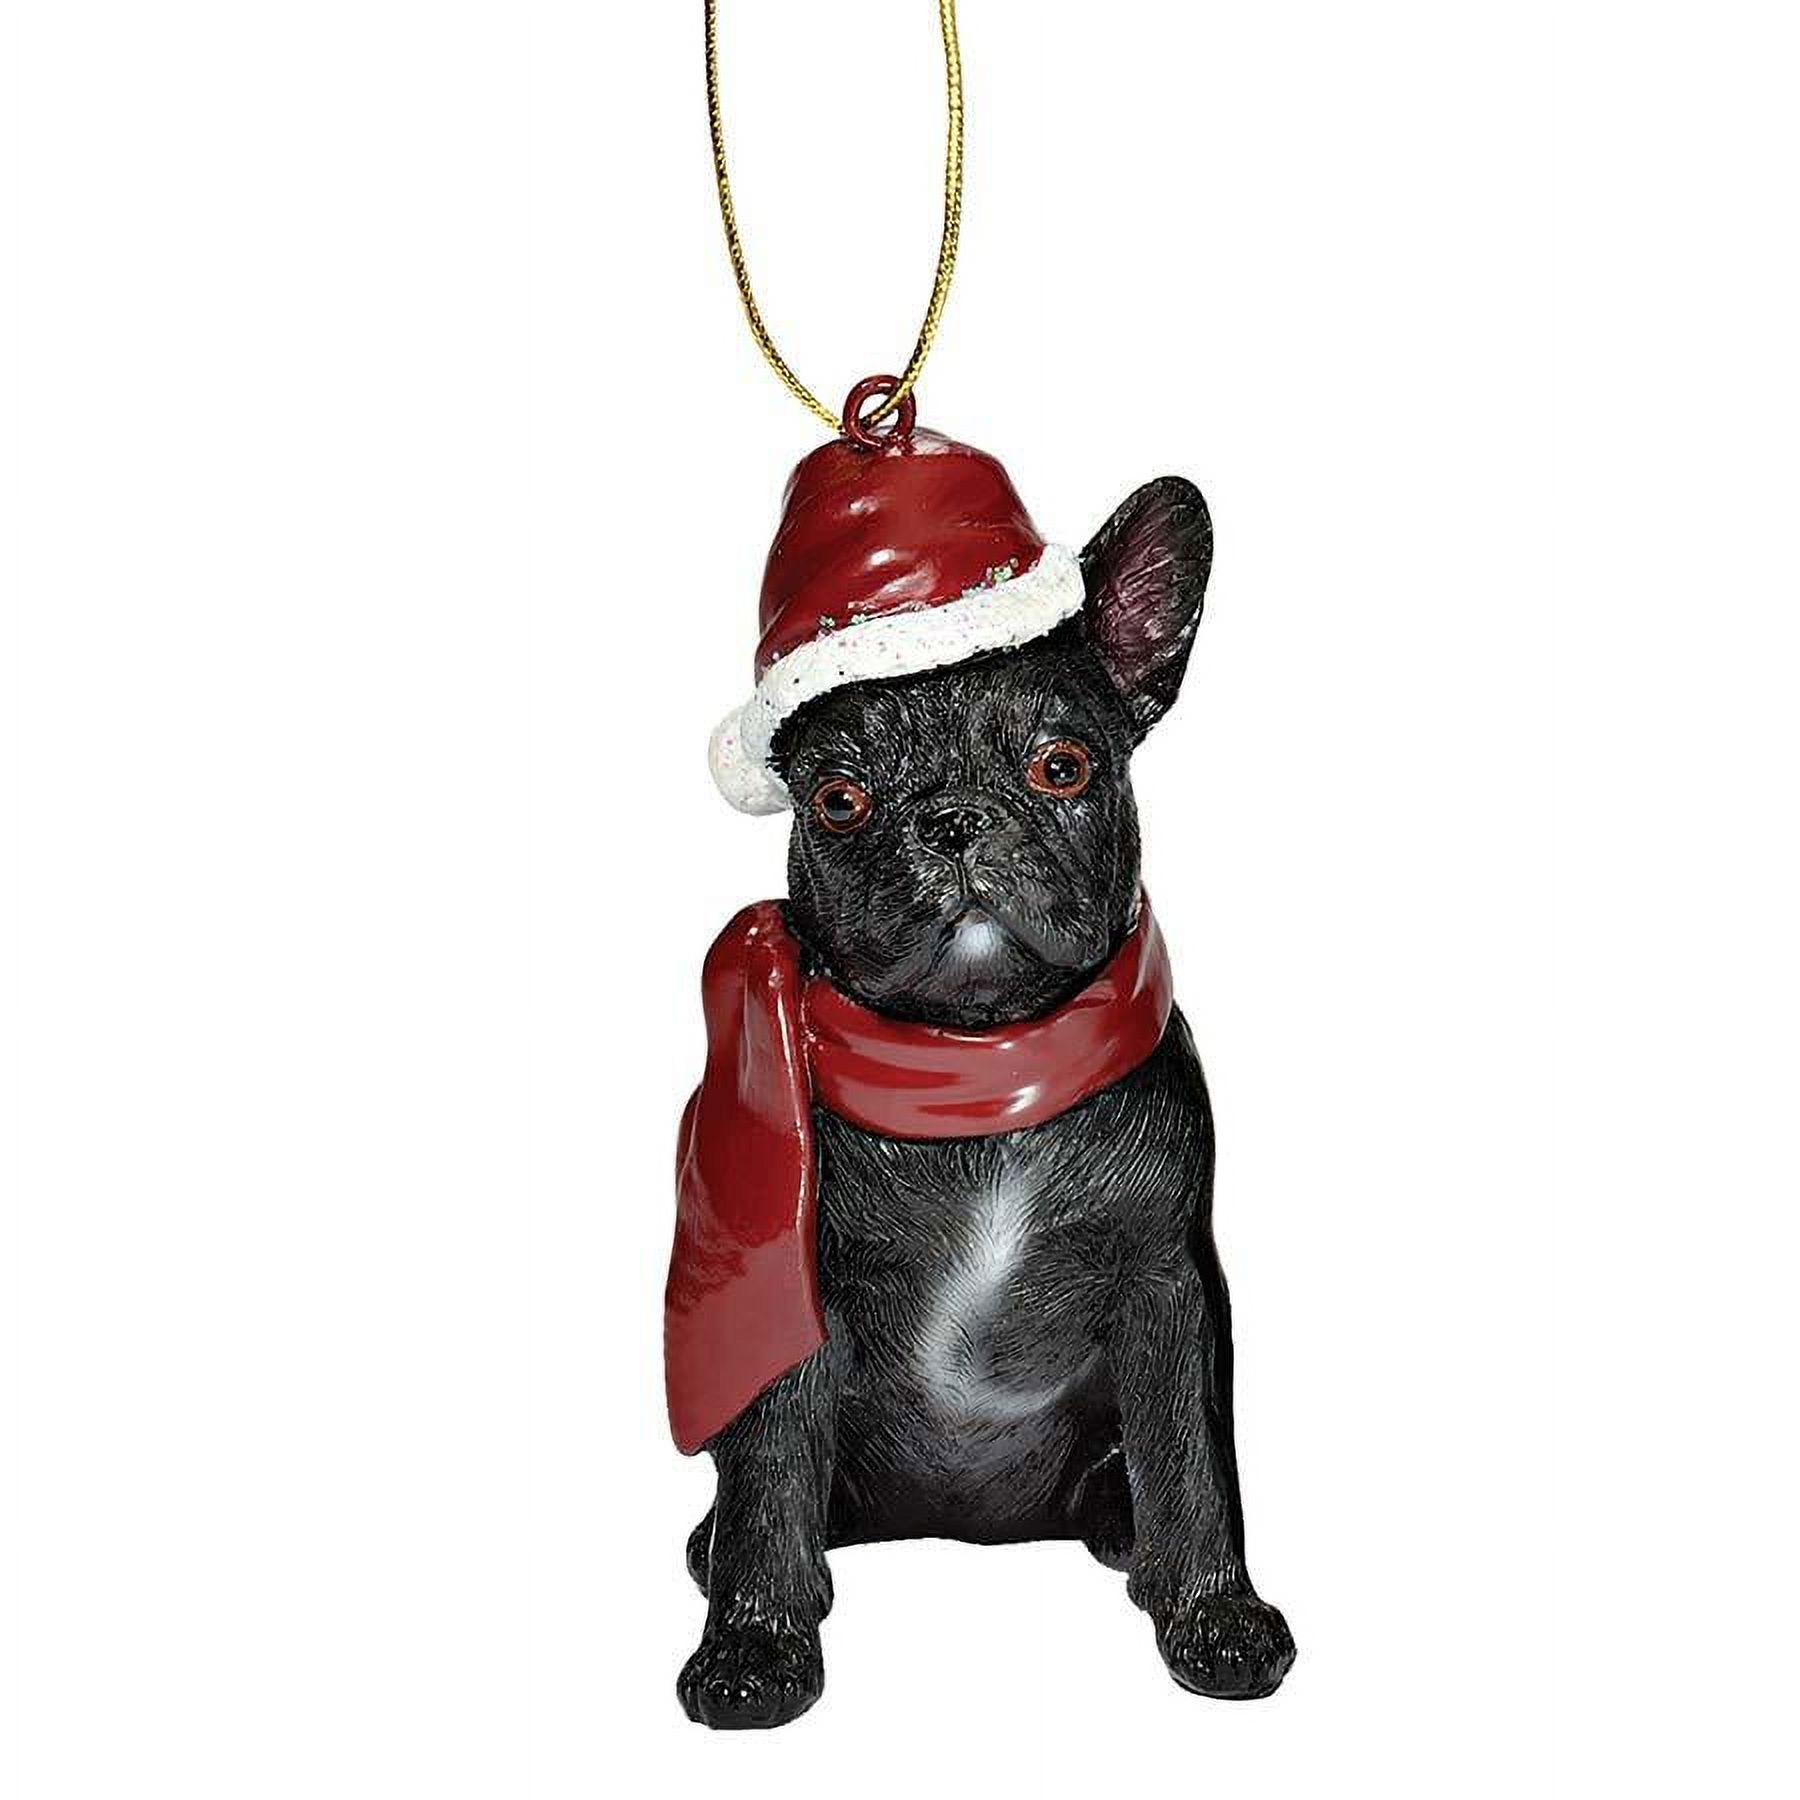 French Bulldog Holiday Dog Ornament Sculpture - image 1 of 1